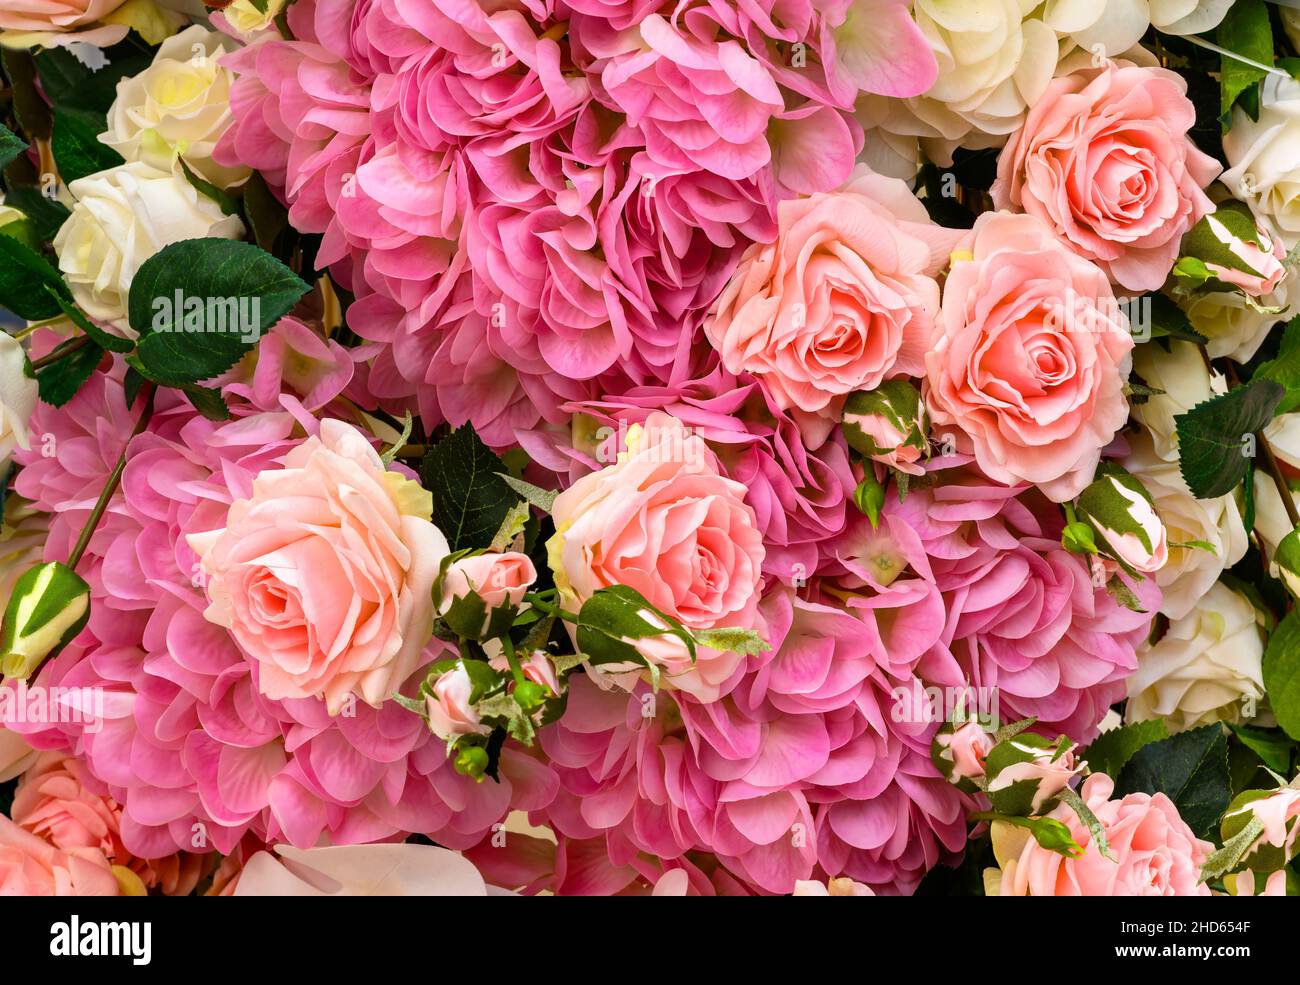 Rose and hydrangea flowers, top view of large bouquet of artificial flowers. Beautiful background of floral design with pink and white flowers. Nature Stock Photo